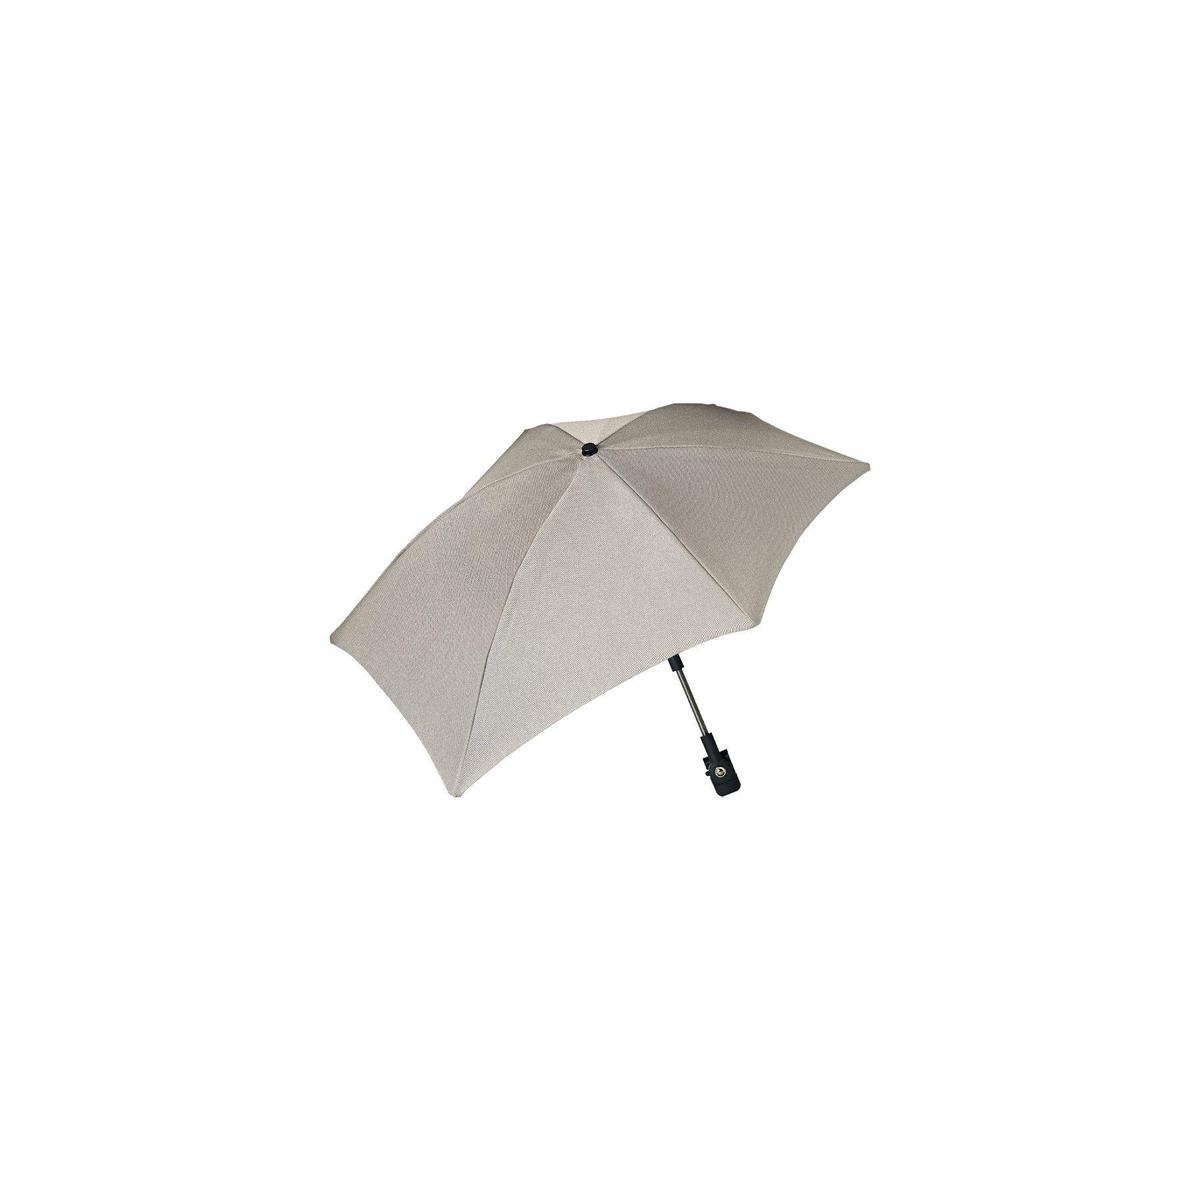 Joolz Day/Geo Parasol-Timeless Taupe 